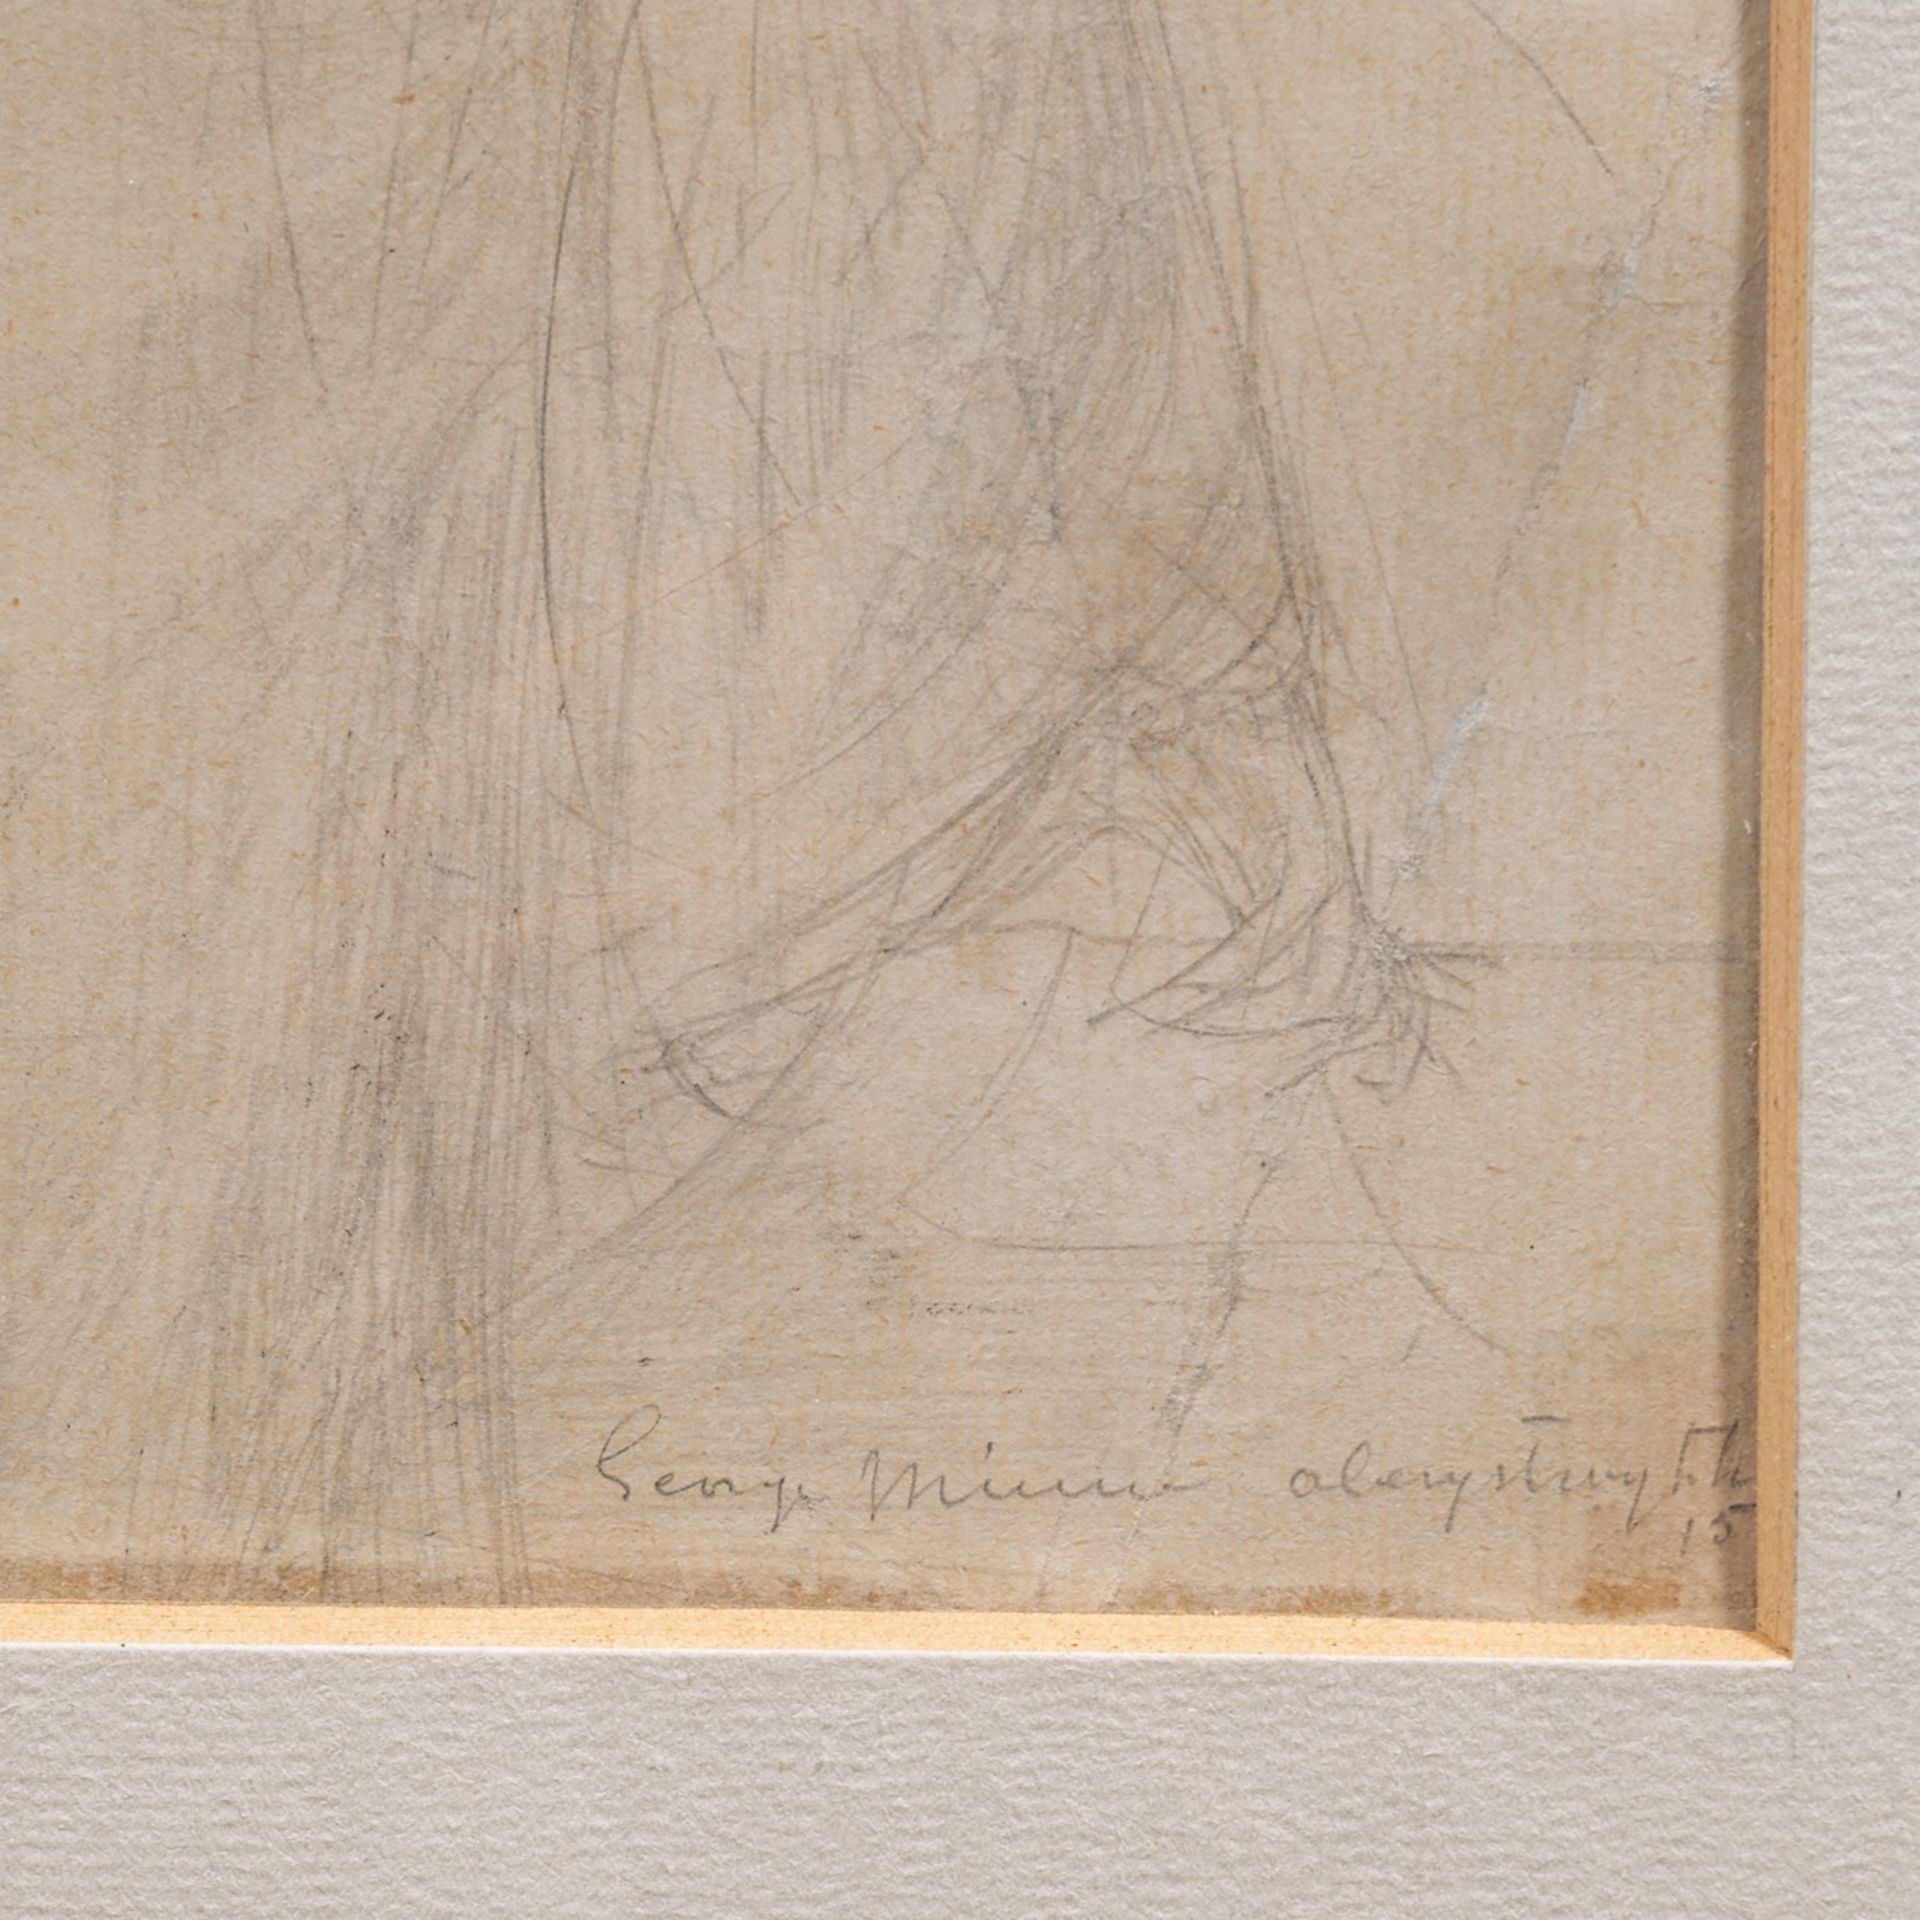 George Minne (1866-1941), study drawing, 1915, pencil on paper 23 x 17.5 cm. (9.0 x 6.8 in.), Frame: - Image 5 of 5